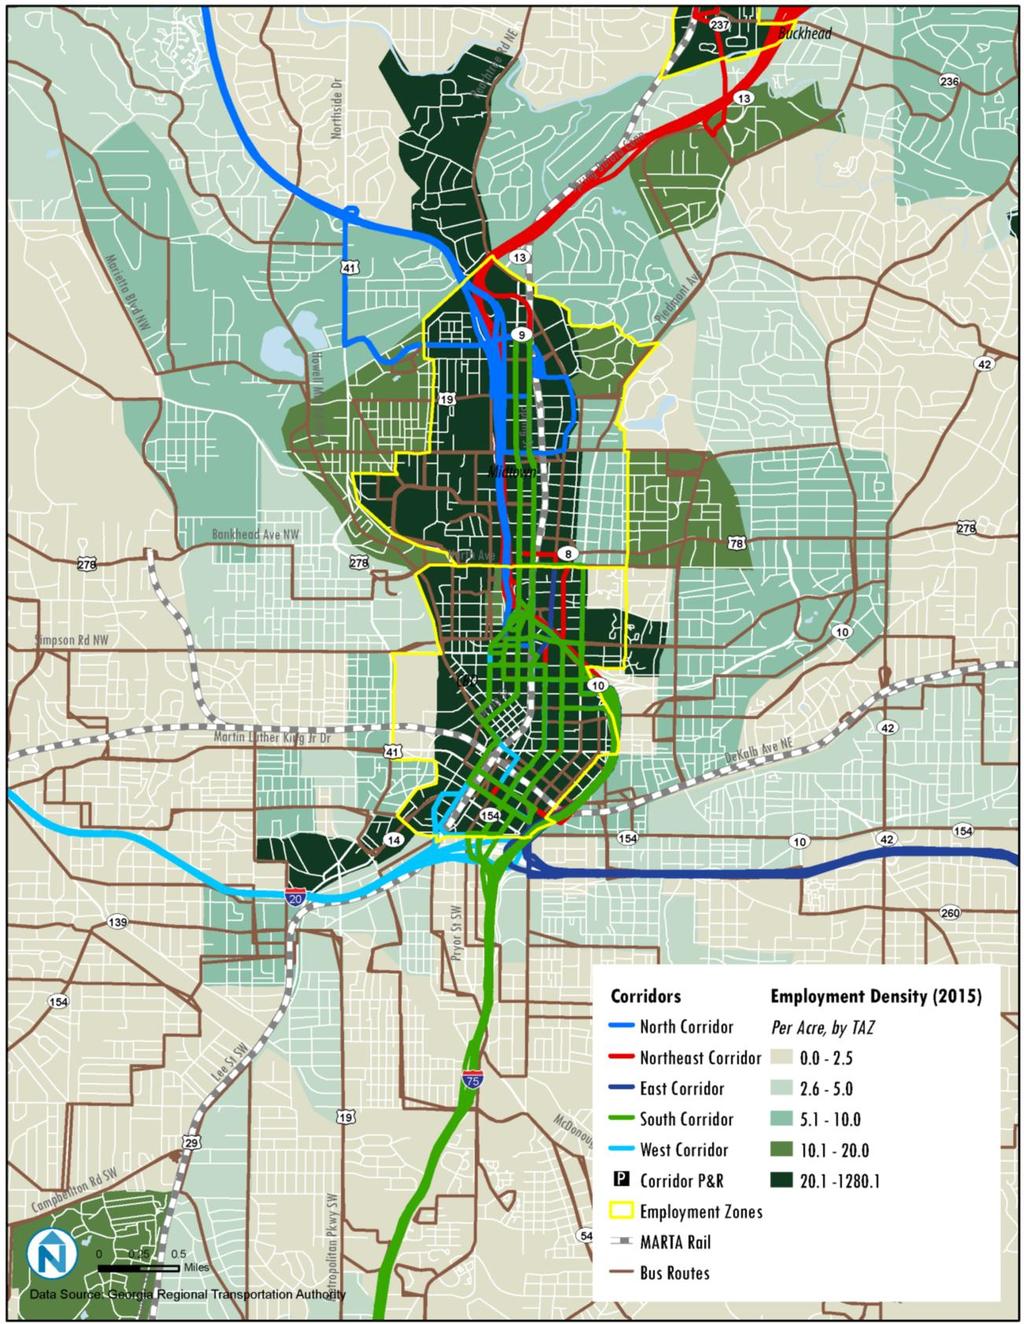 Figure 42: Employment Density (2015): Downtown Existing